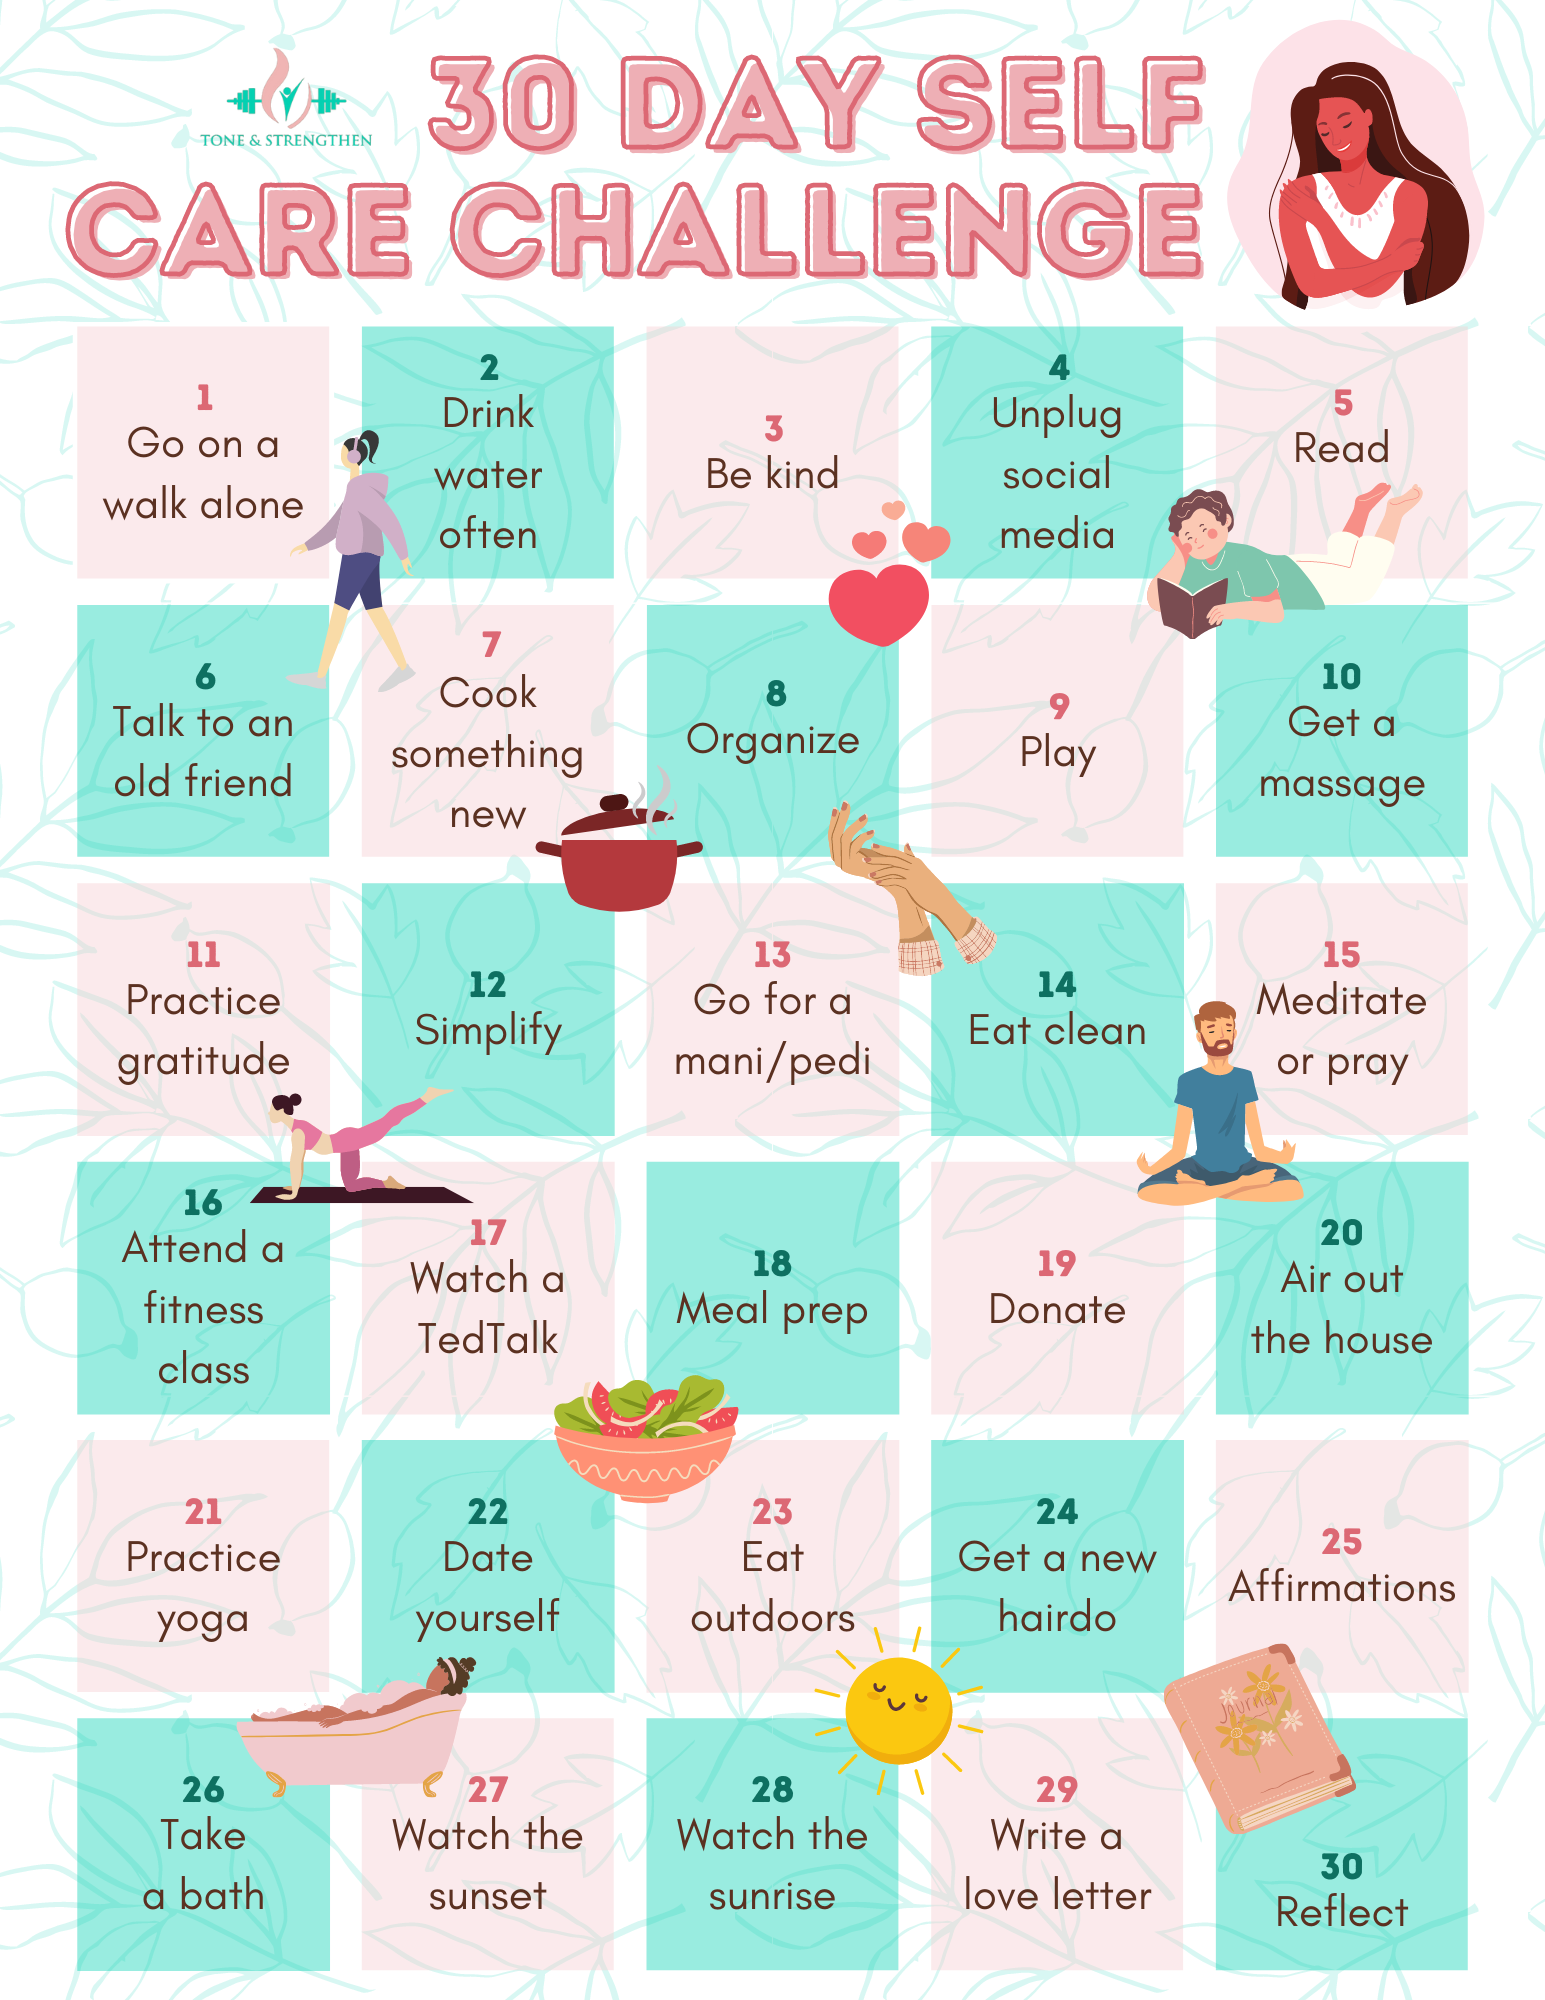 30Day Self Care Challenge Tone & Strengthen